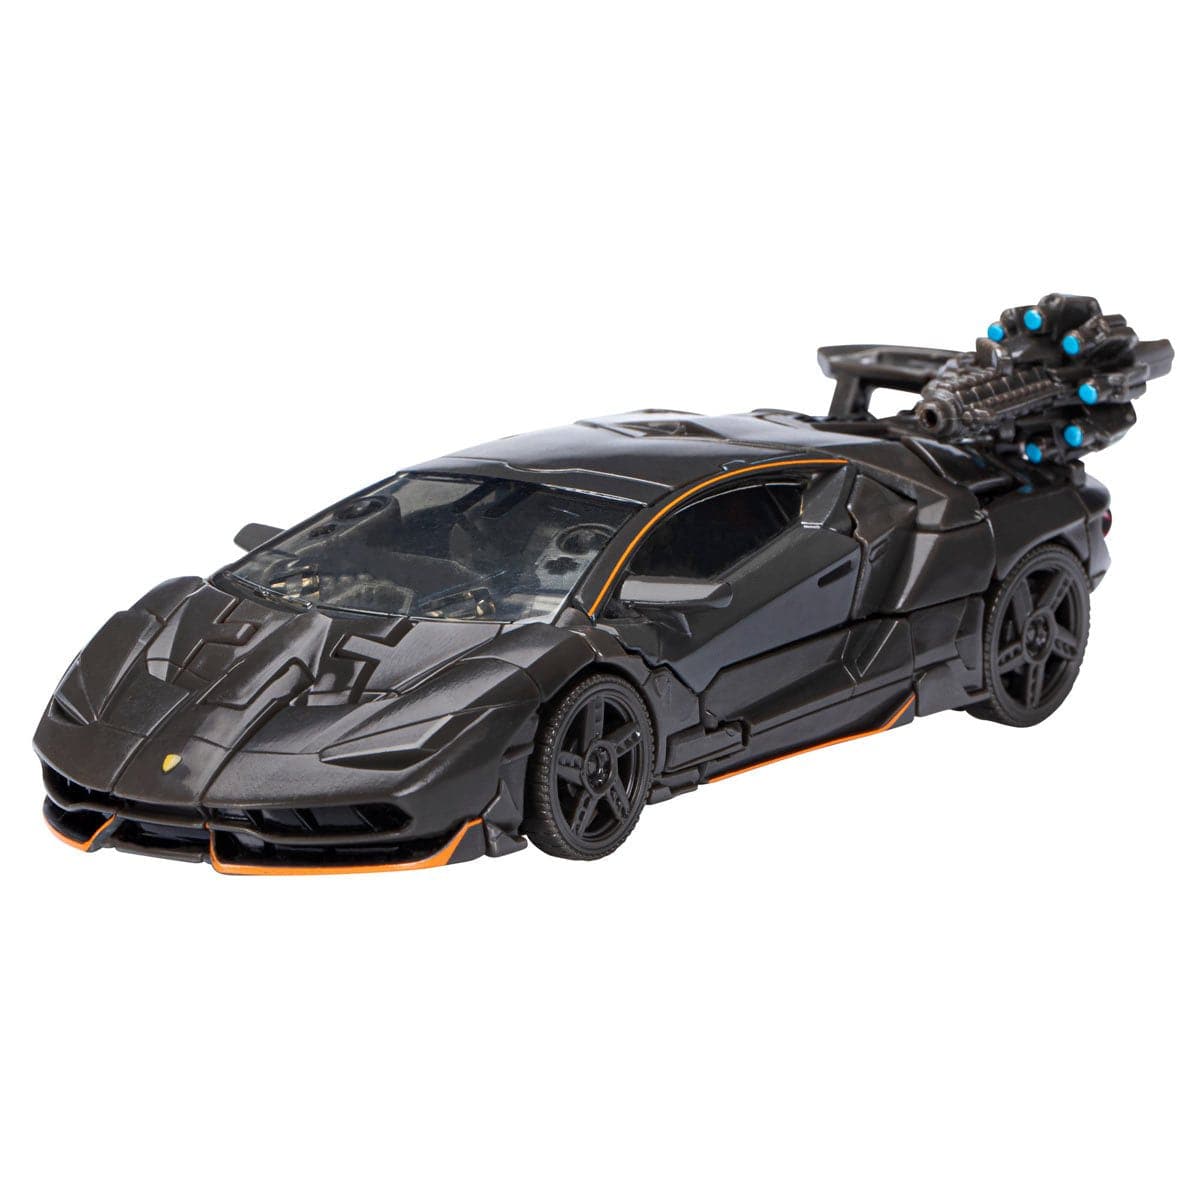 Transformers Studio Series Deluxe The Last Knight Hot Rod Car Lombo